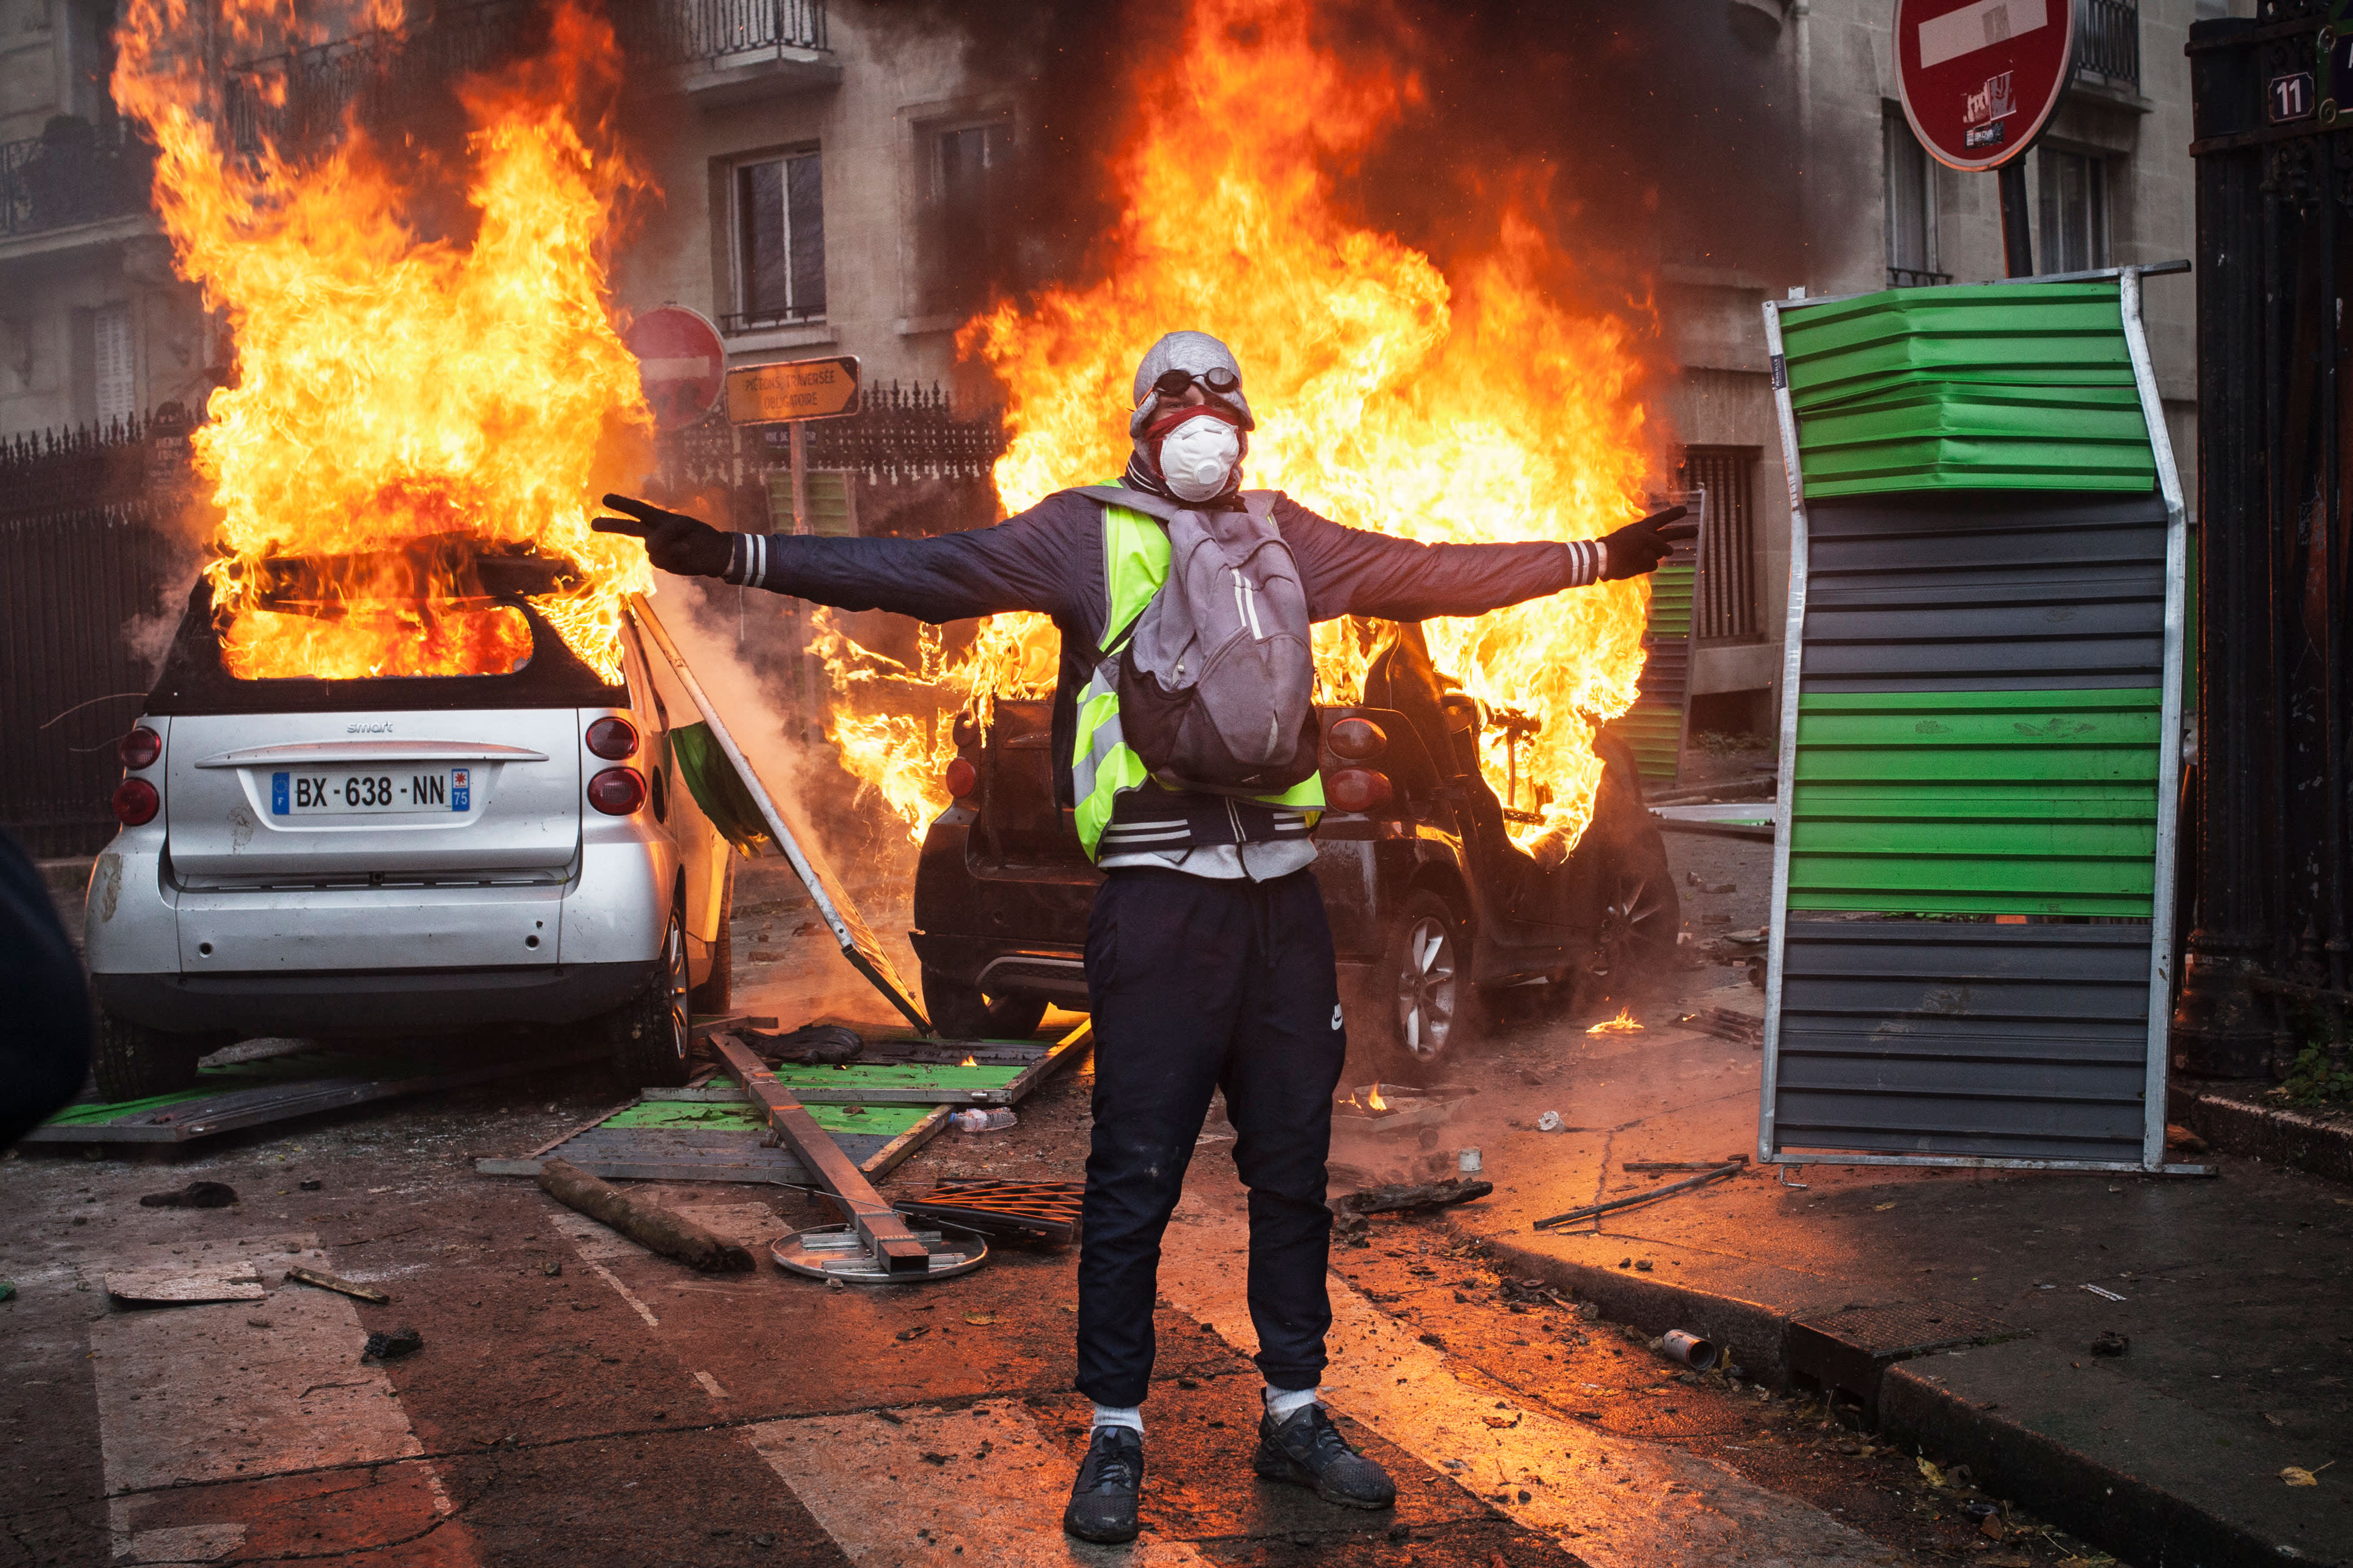 France mulls state of emergency after Paris riots, won't change policy